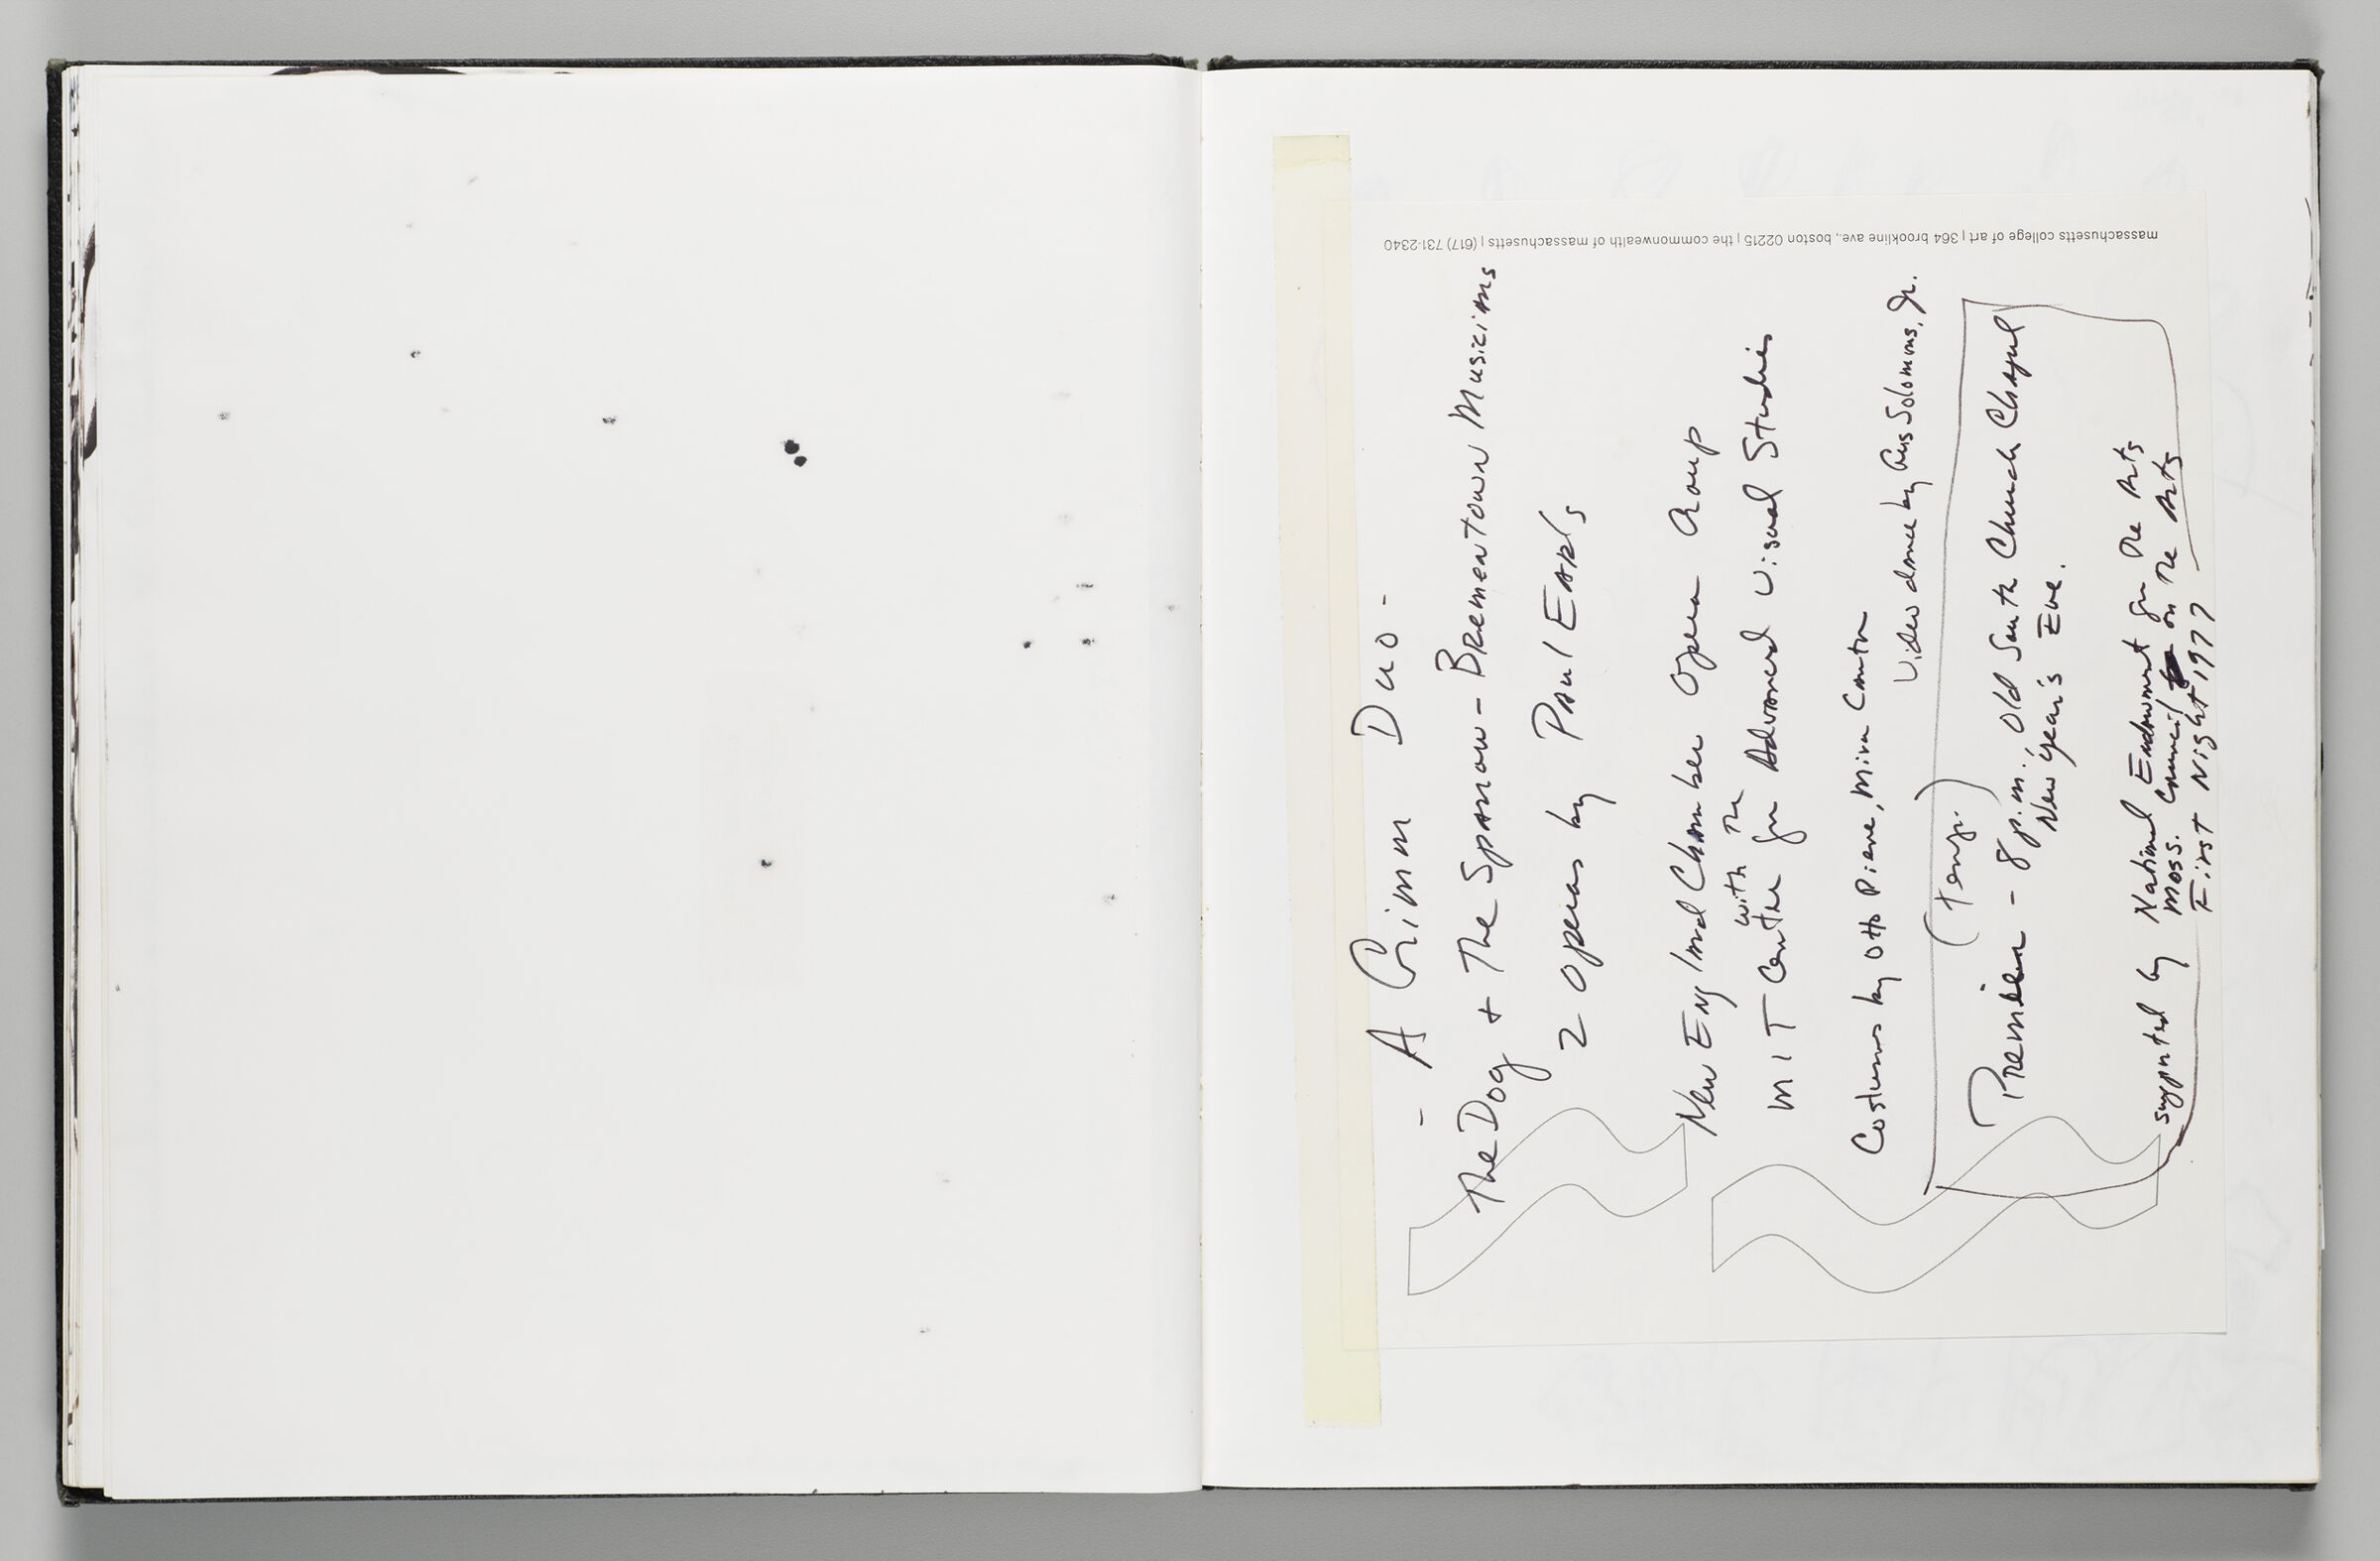 Untitled (Stray Black Marks, Left Page); Untitled (Taped In Note, Right Page)